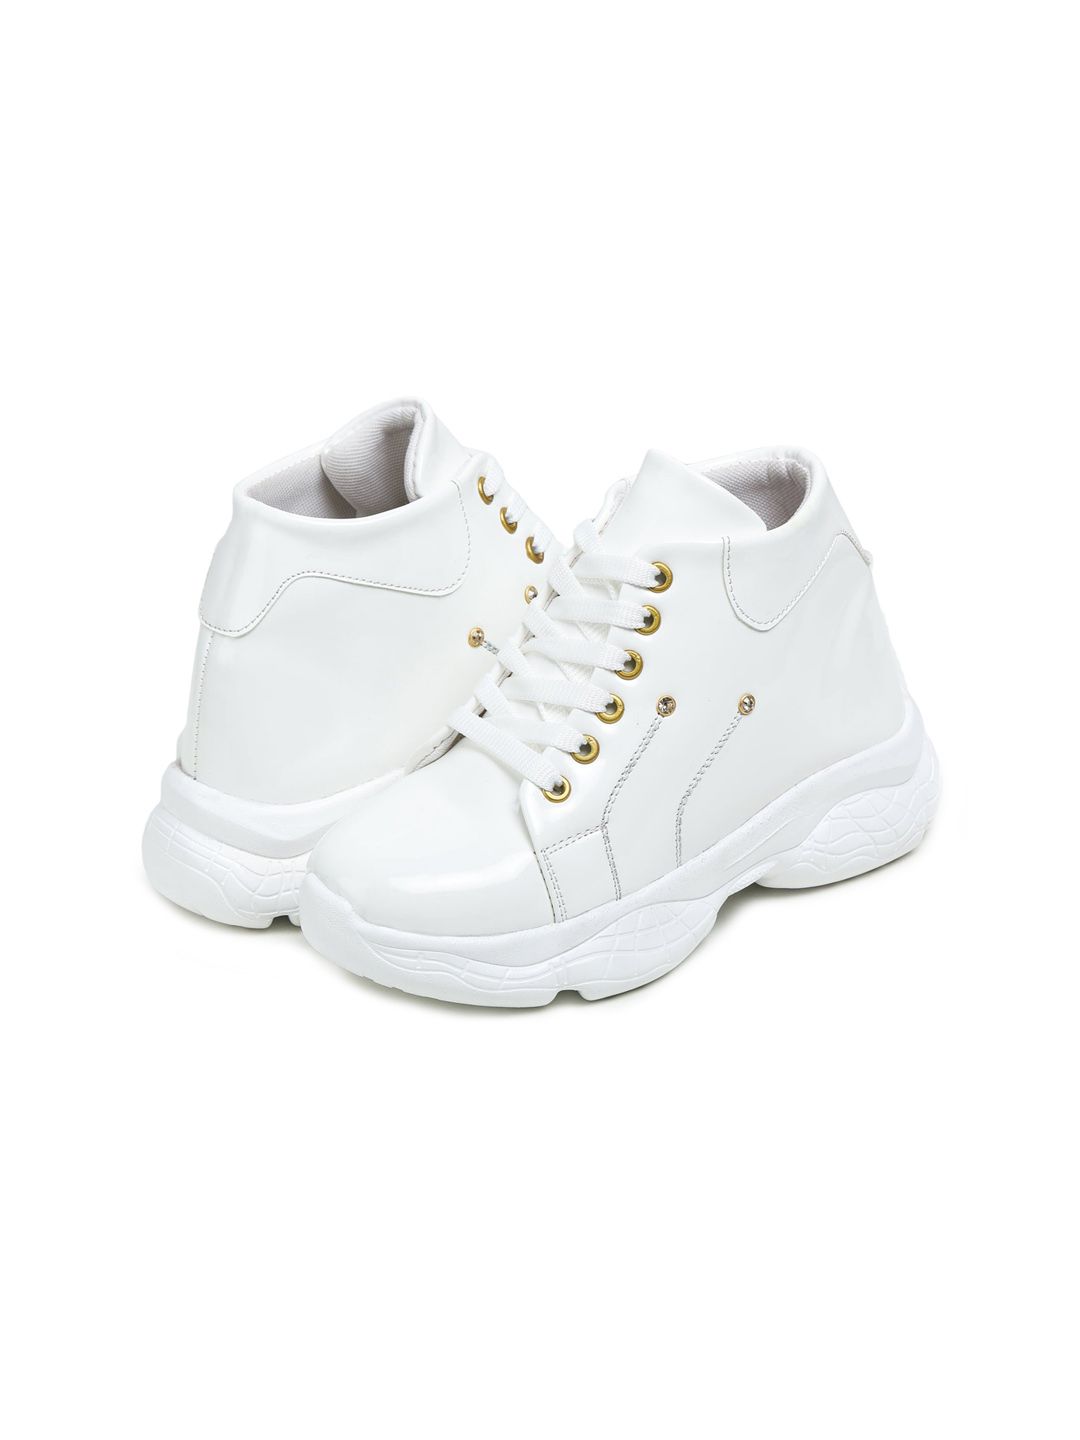 BOOTCO Women White Lace-Up Mid-Top Sneakers Price in India